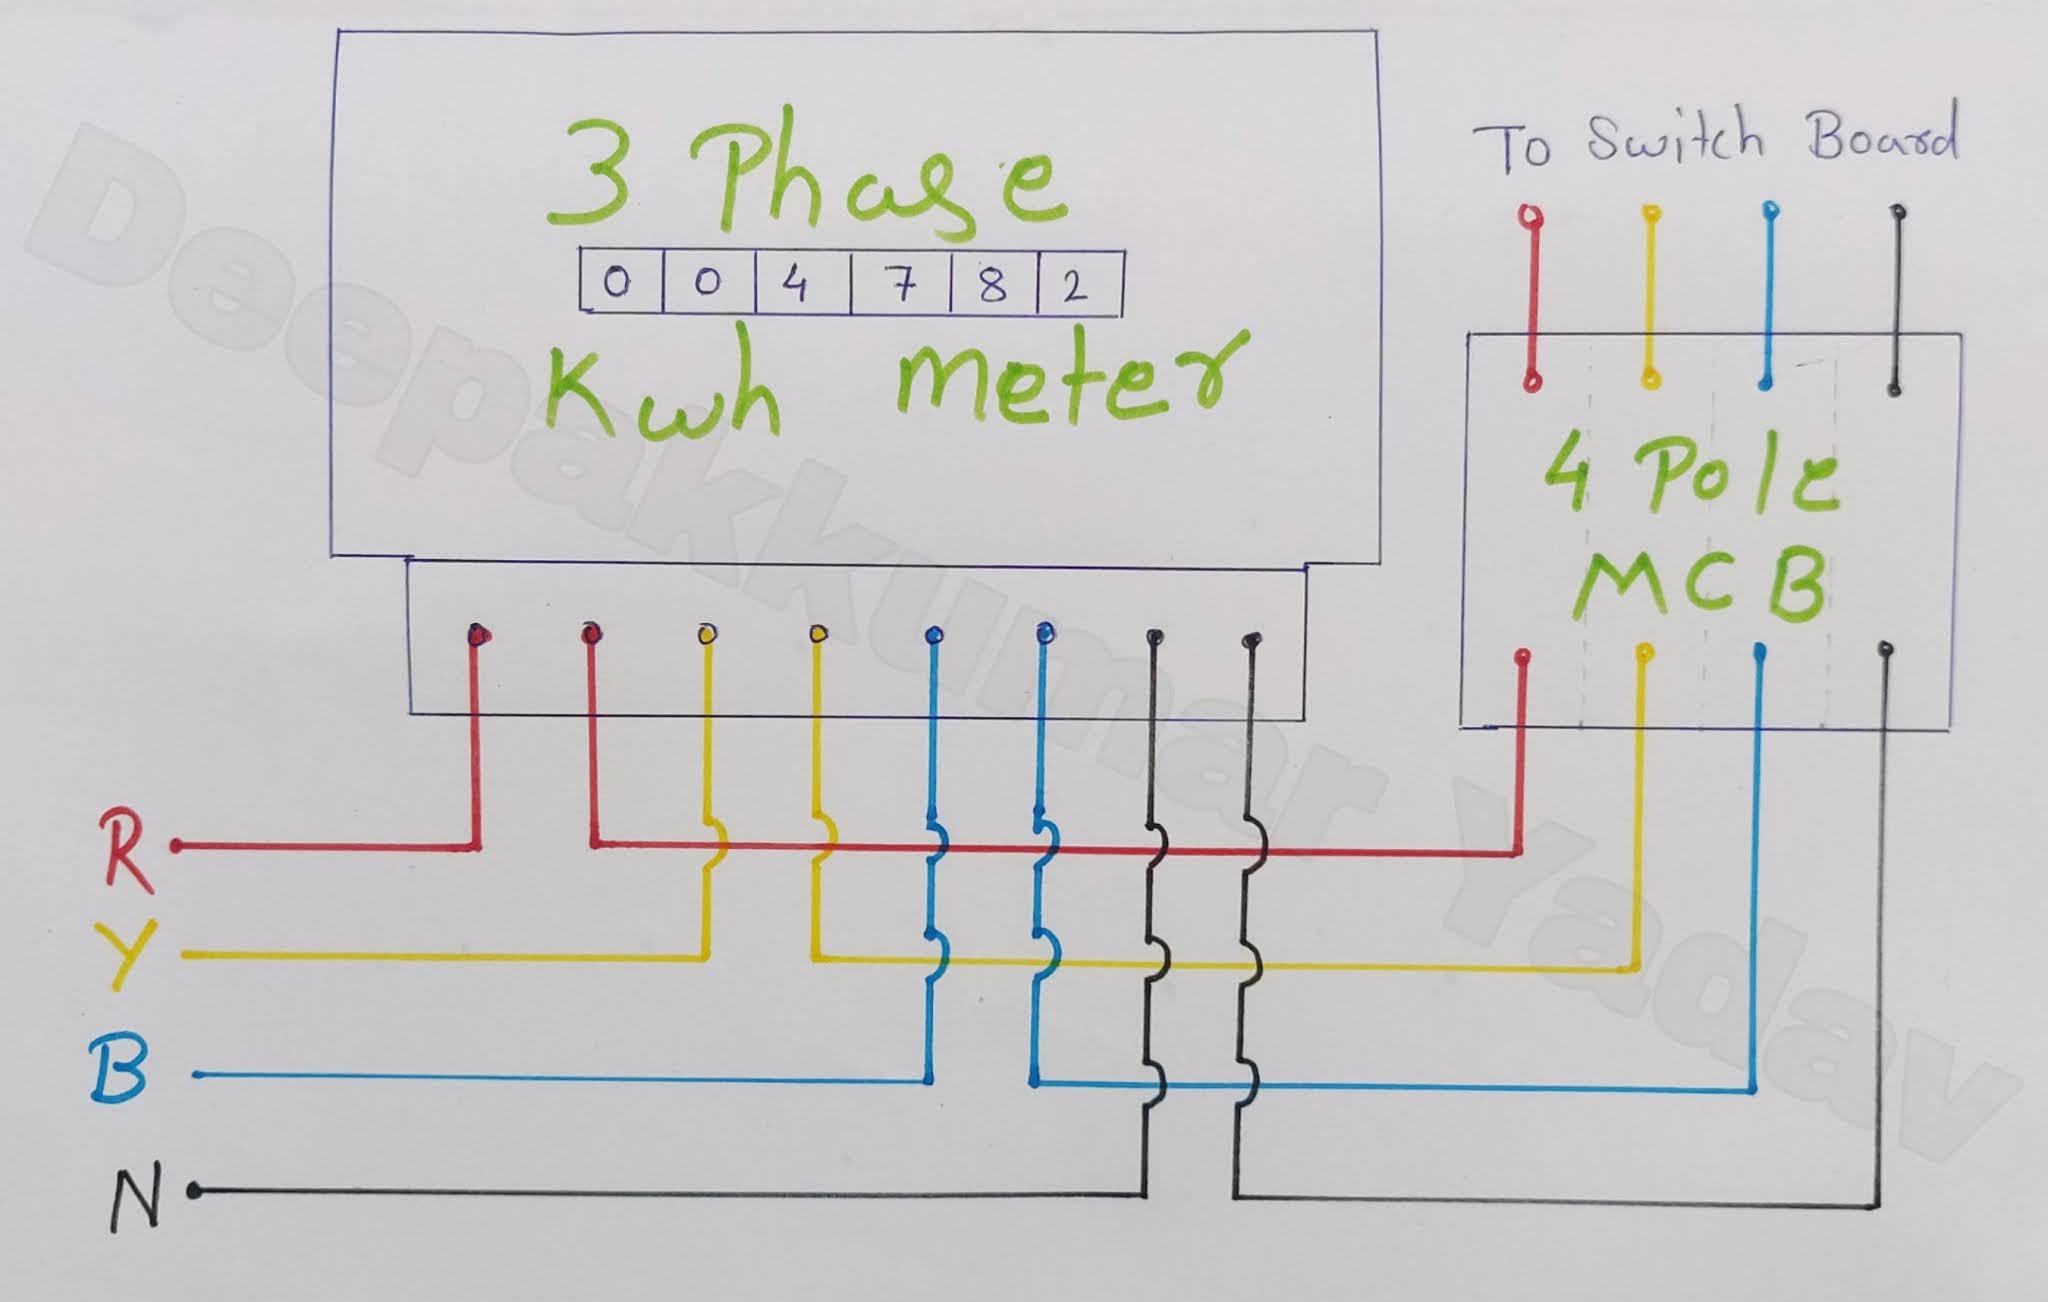 3 Phase Energy Meter Wiring Connection, How To Do 3 Phase House Wiring Diagram